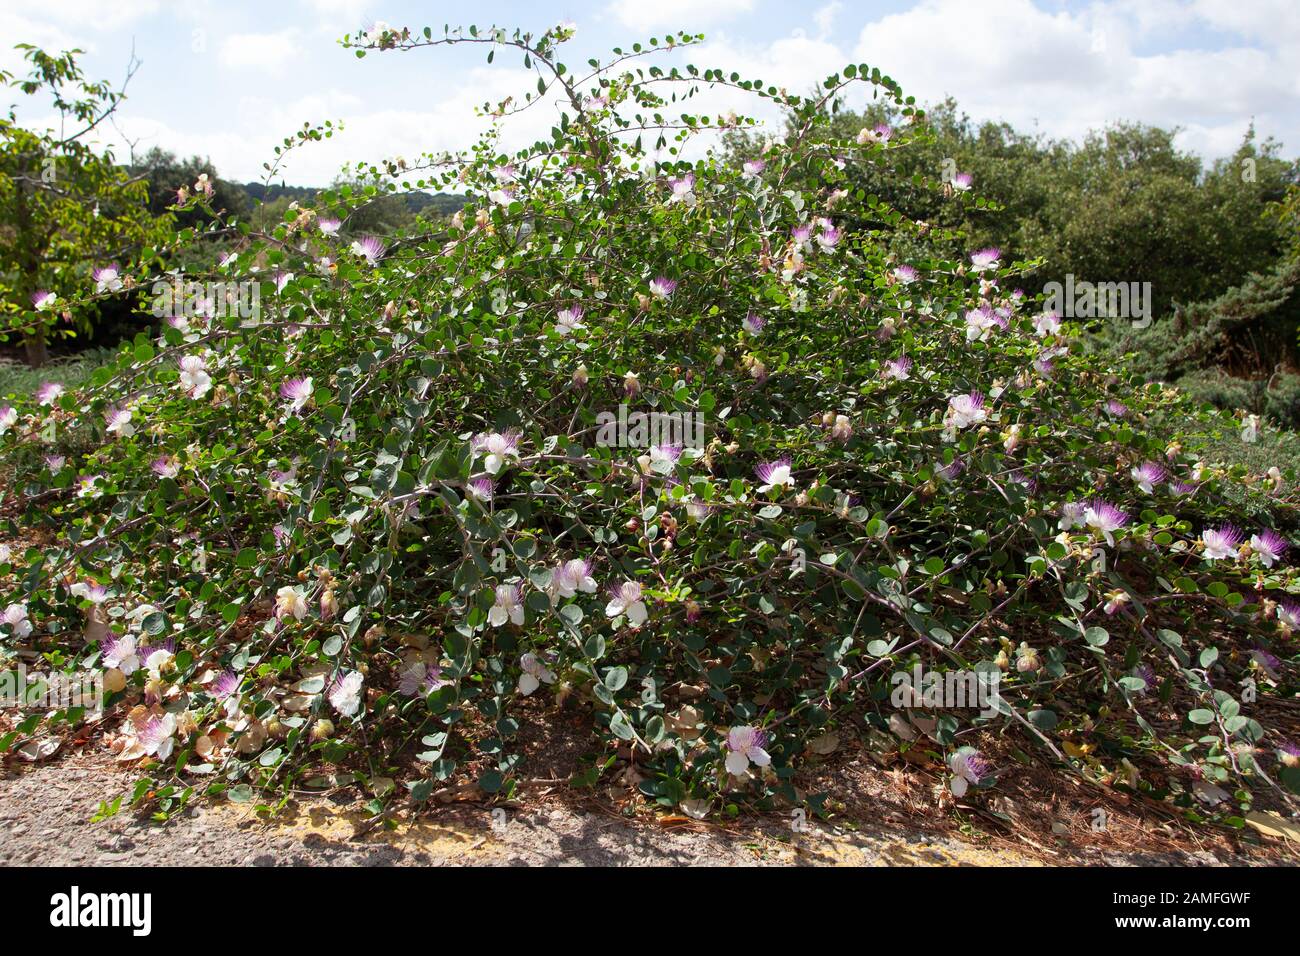 flowering Common Caper (Capparis spinosa) shrub. Photographed in Israel in July Stock Photo